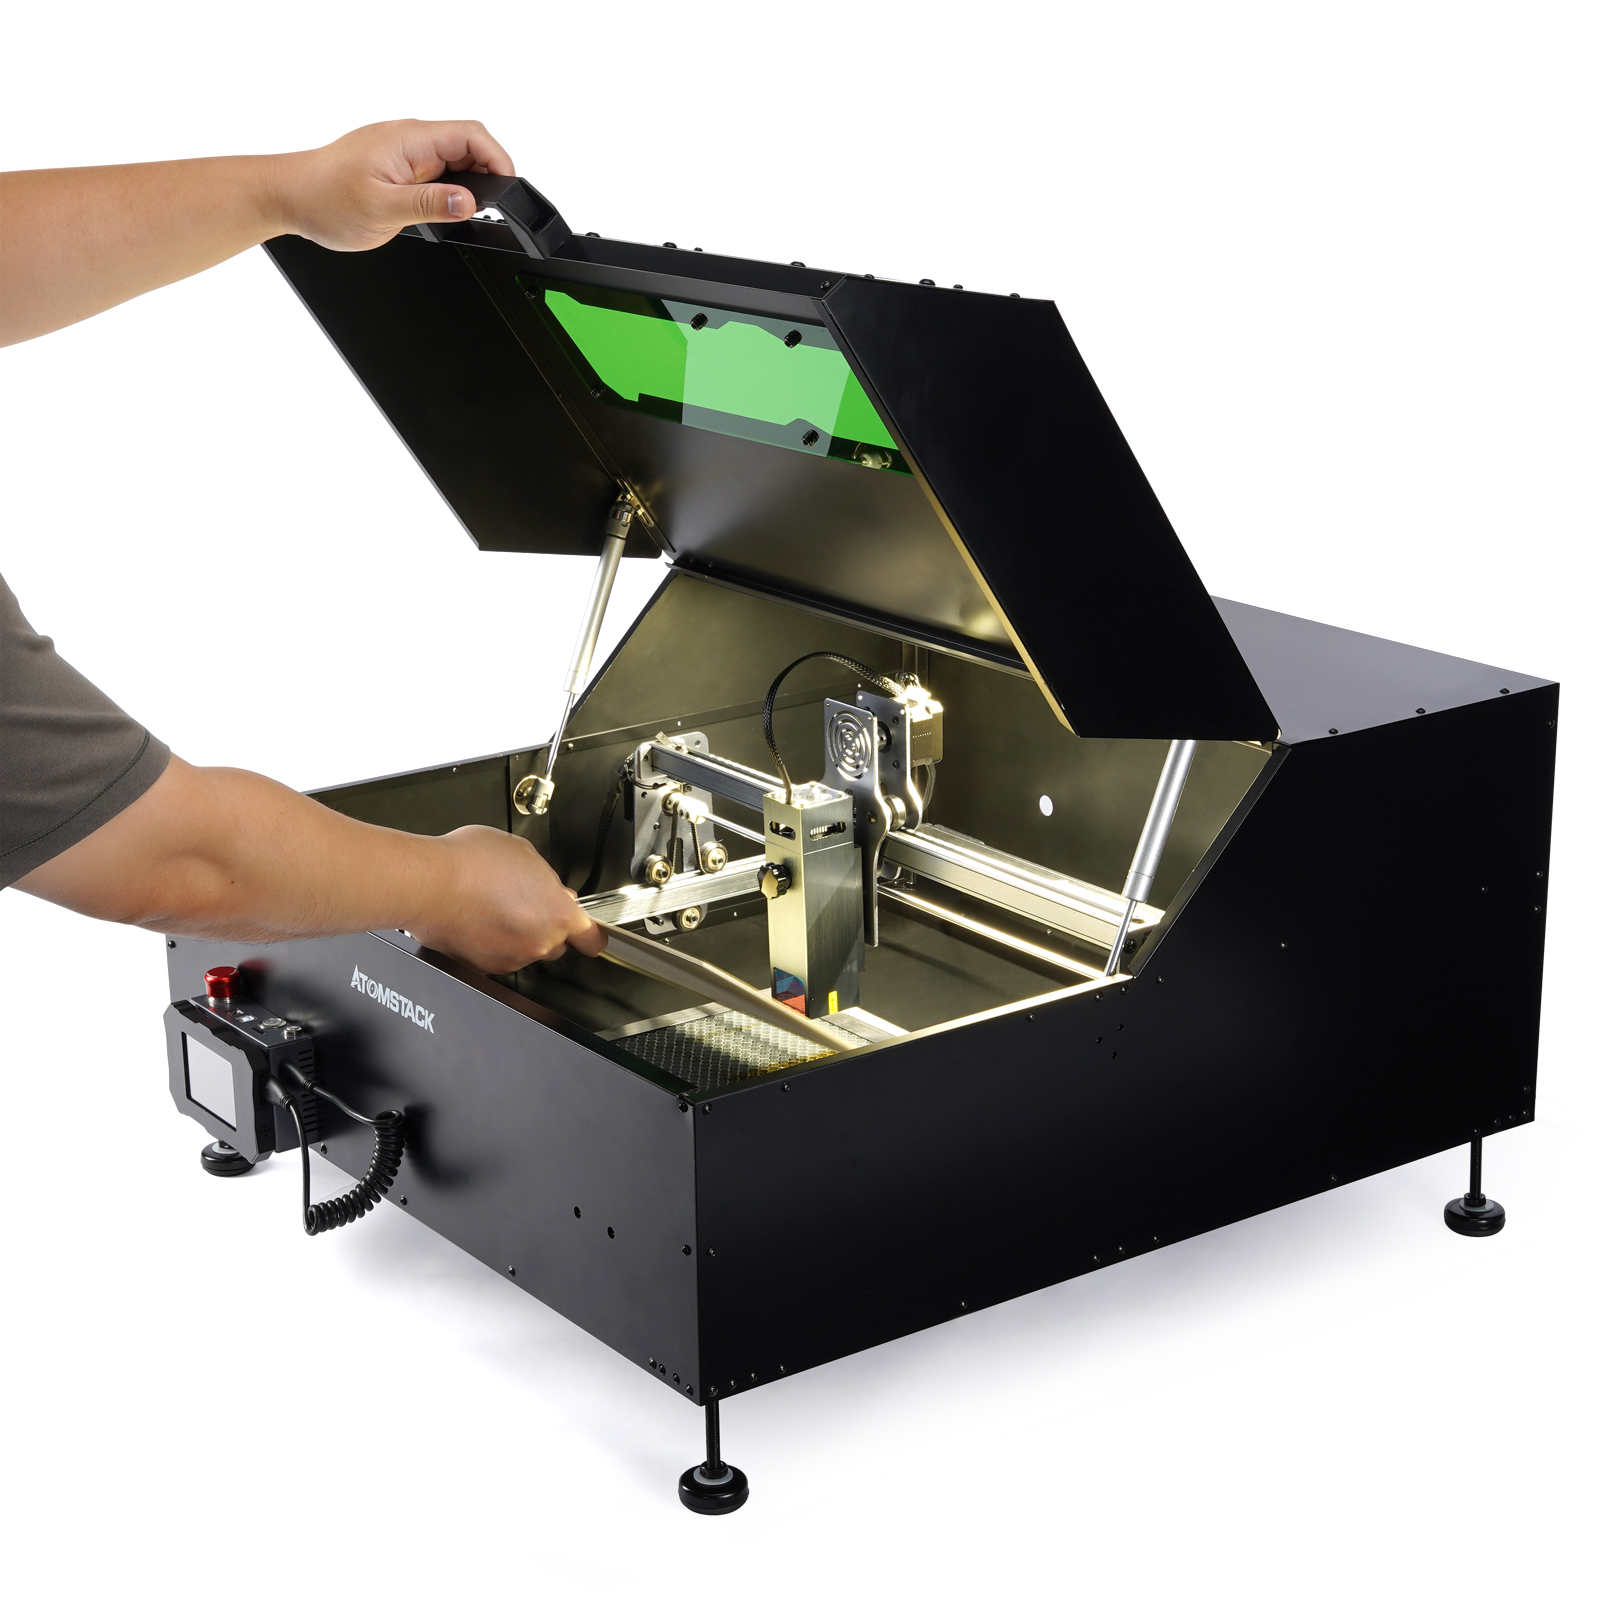 Find [EU Direct] Atomstack B1 Enclosure Safe Dust-Proof Cover for Laser Engraving Cutting Machine for Sale on Gipsybee.com with cryptocurrencies